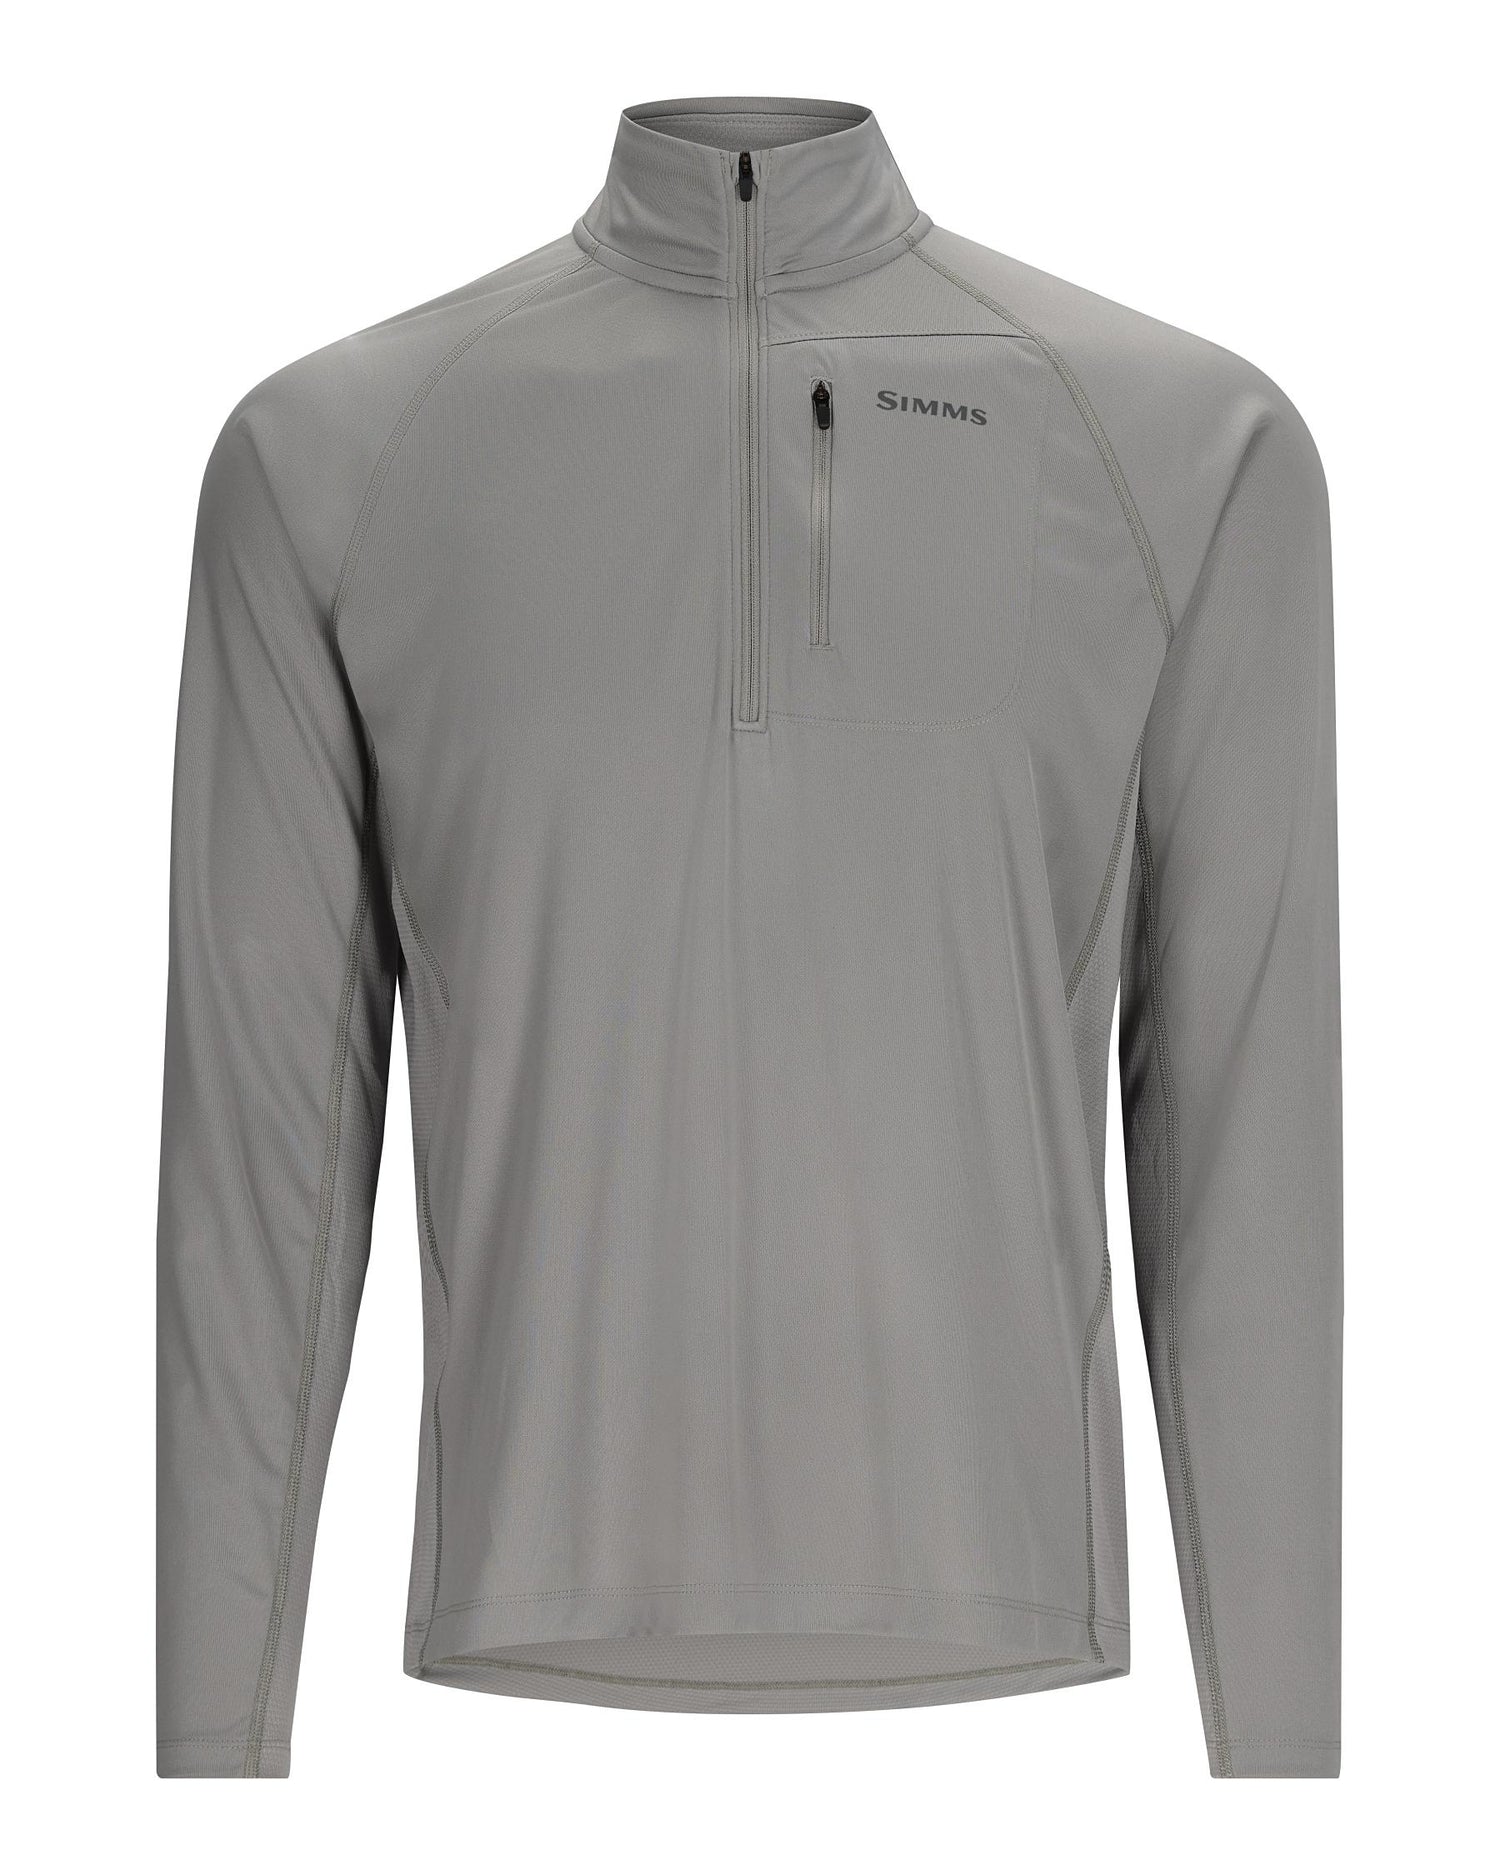 M's Simms Challenger Solar Half Zip | Simms Fishing Products